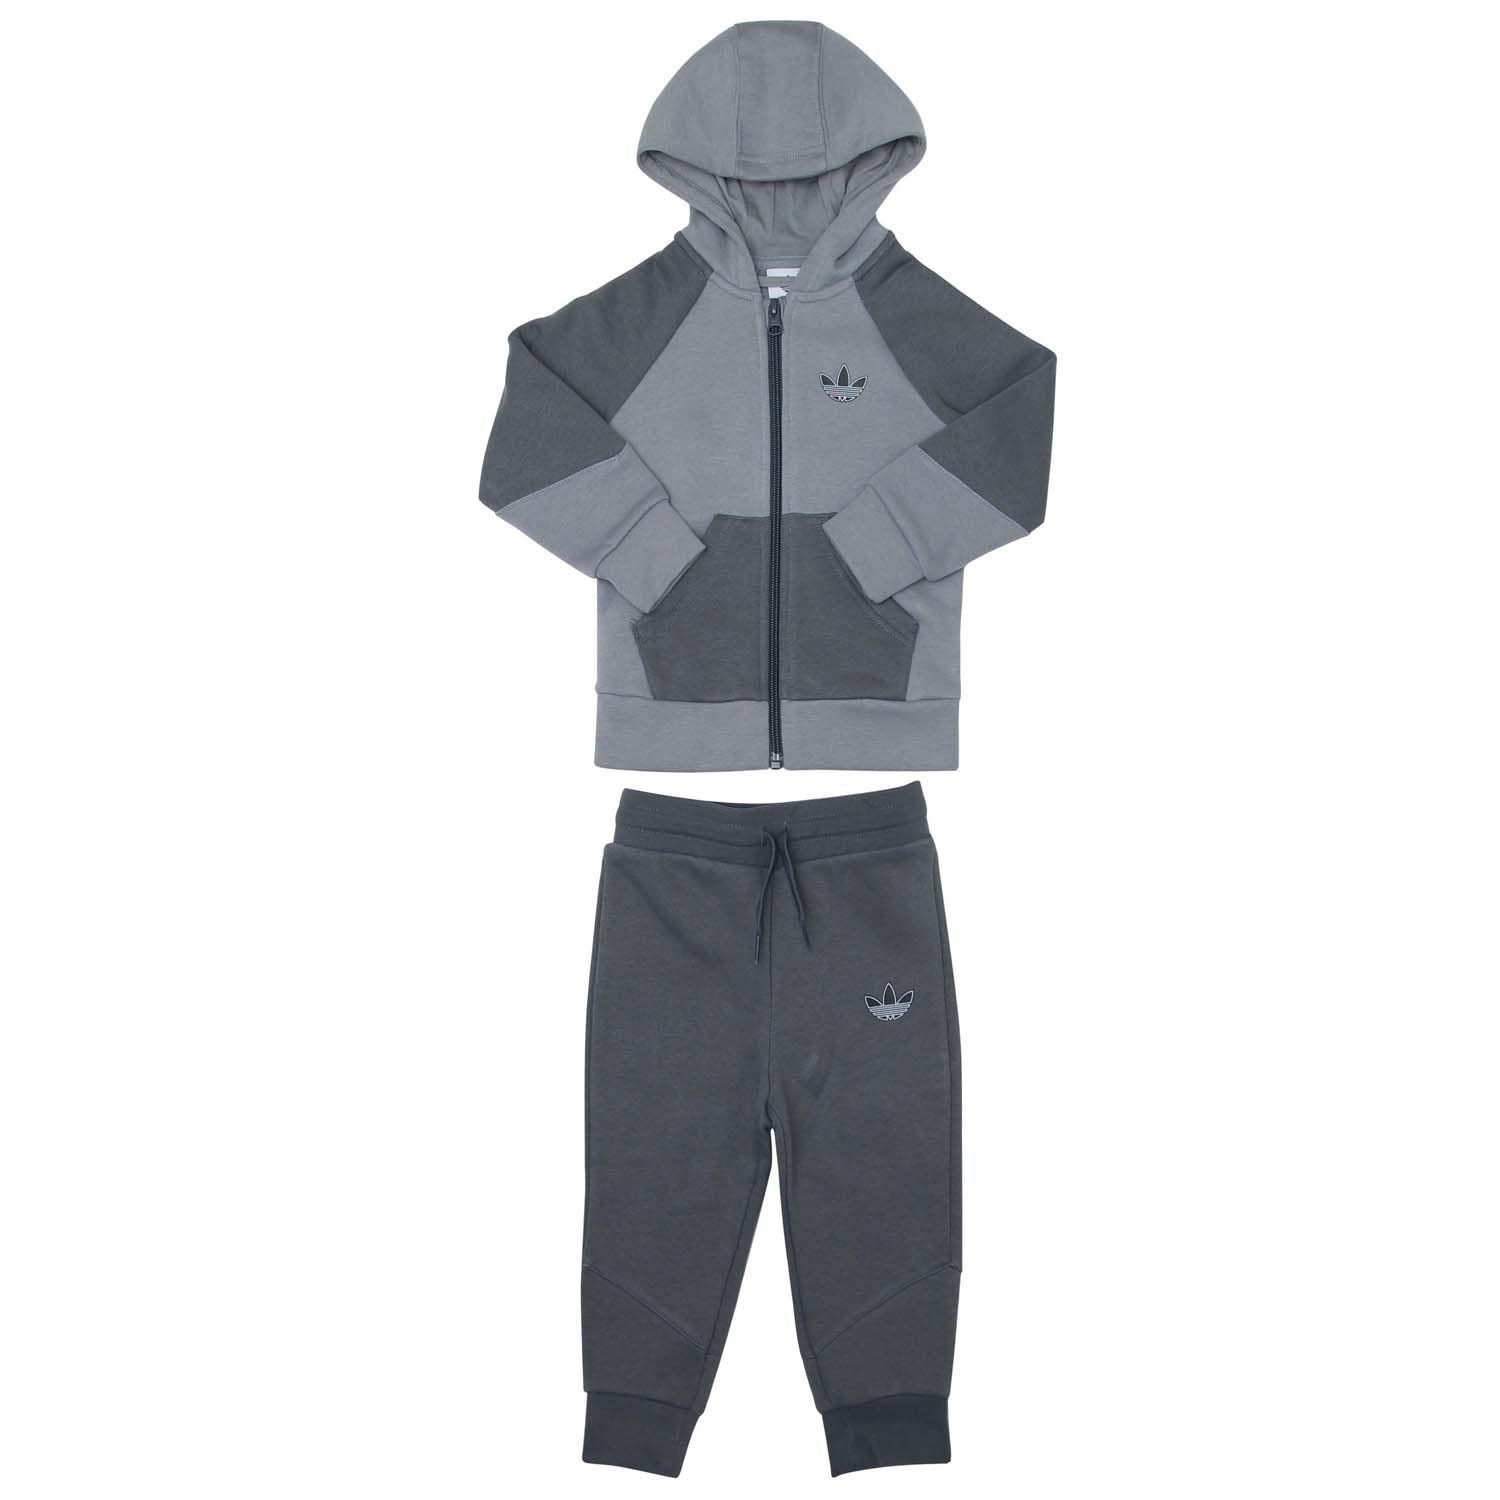 Baby adidas Originals SPRT Full-Zip Hoody Set in grey.Top:- Lined hood.- Ribbed cuffs and hem.- Long sleeves.- Kangaroo style pocket to front.- Regular fit.- Main material: 70% Cotton  30% Polyester (Recycled). Pants: - Drawcord on ribbed waist.- Ribbed cuffs.- Fleece.- Trefoil logo printed at left thigh.- Regular fit.- Main material: 70% Cotton  30% Polyester (Recycled). - Ref: H25240